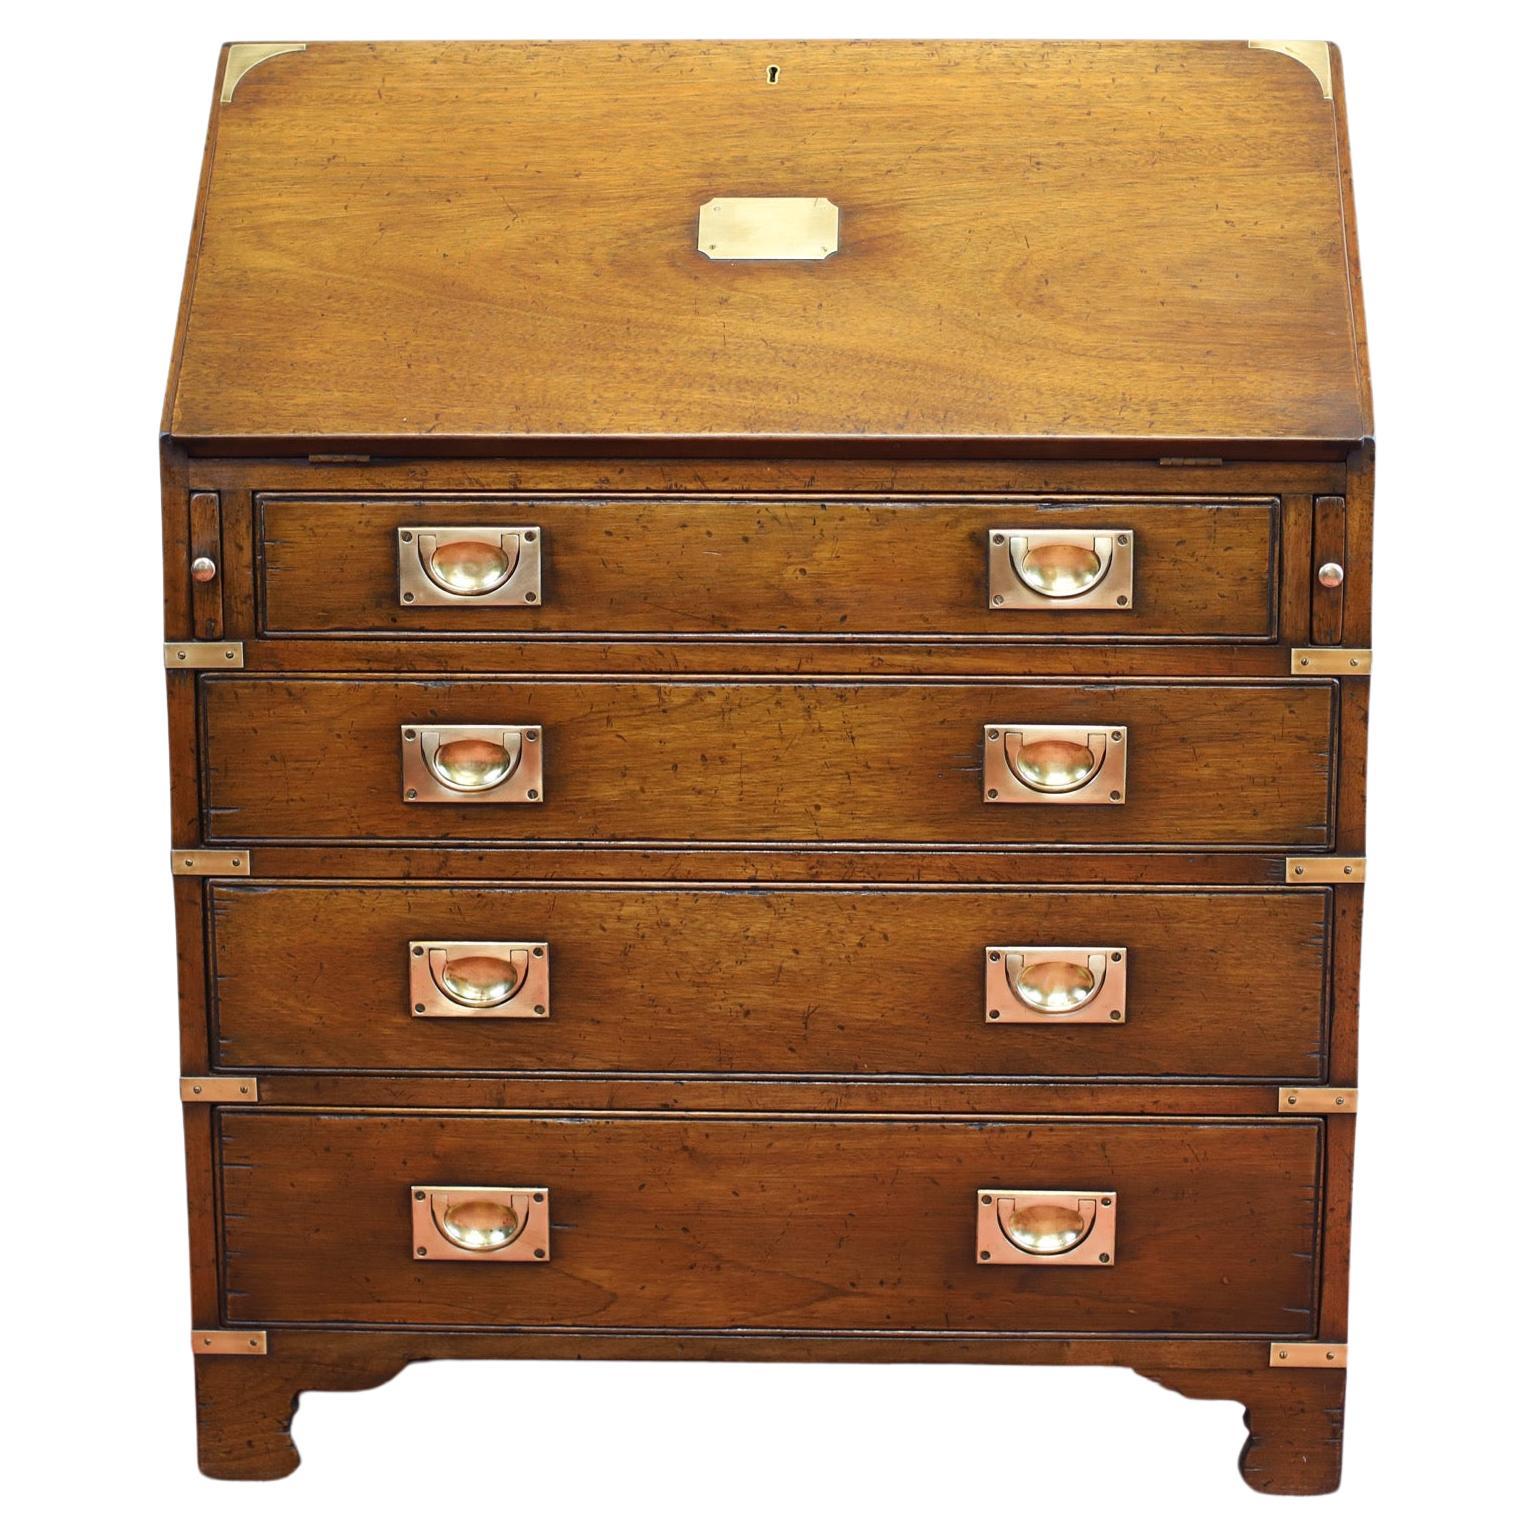 This beautiful writing bureau desk is a stunning example of military campaign furniture retail . Crafted from sturdy oak and adorned with brass accents, this antique desk features five spacious drawers and a leather writing surface. The rich brown